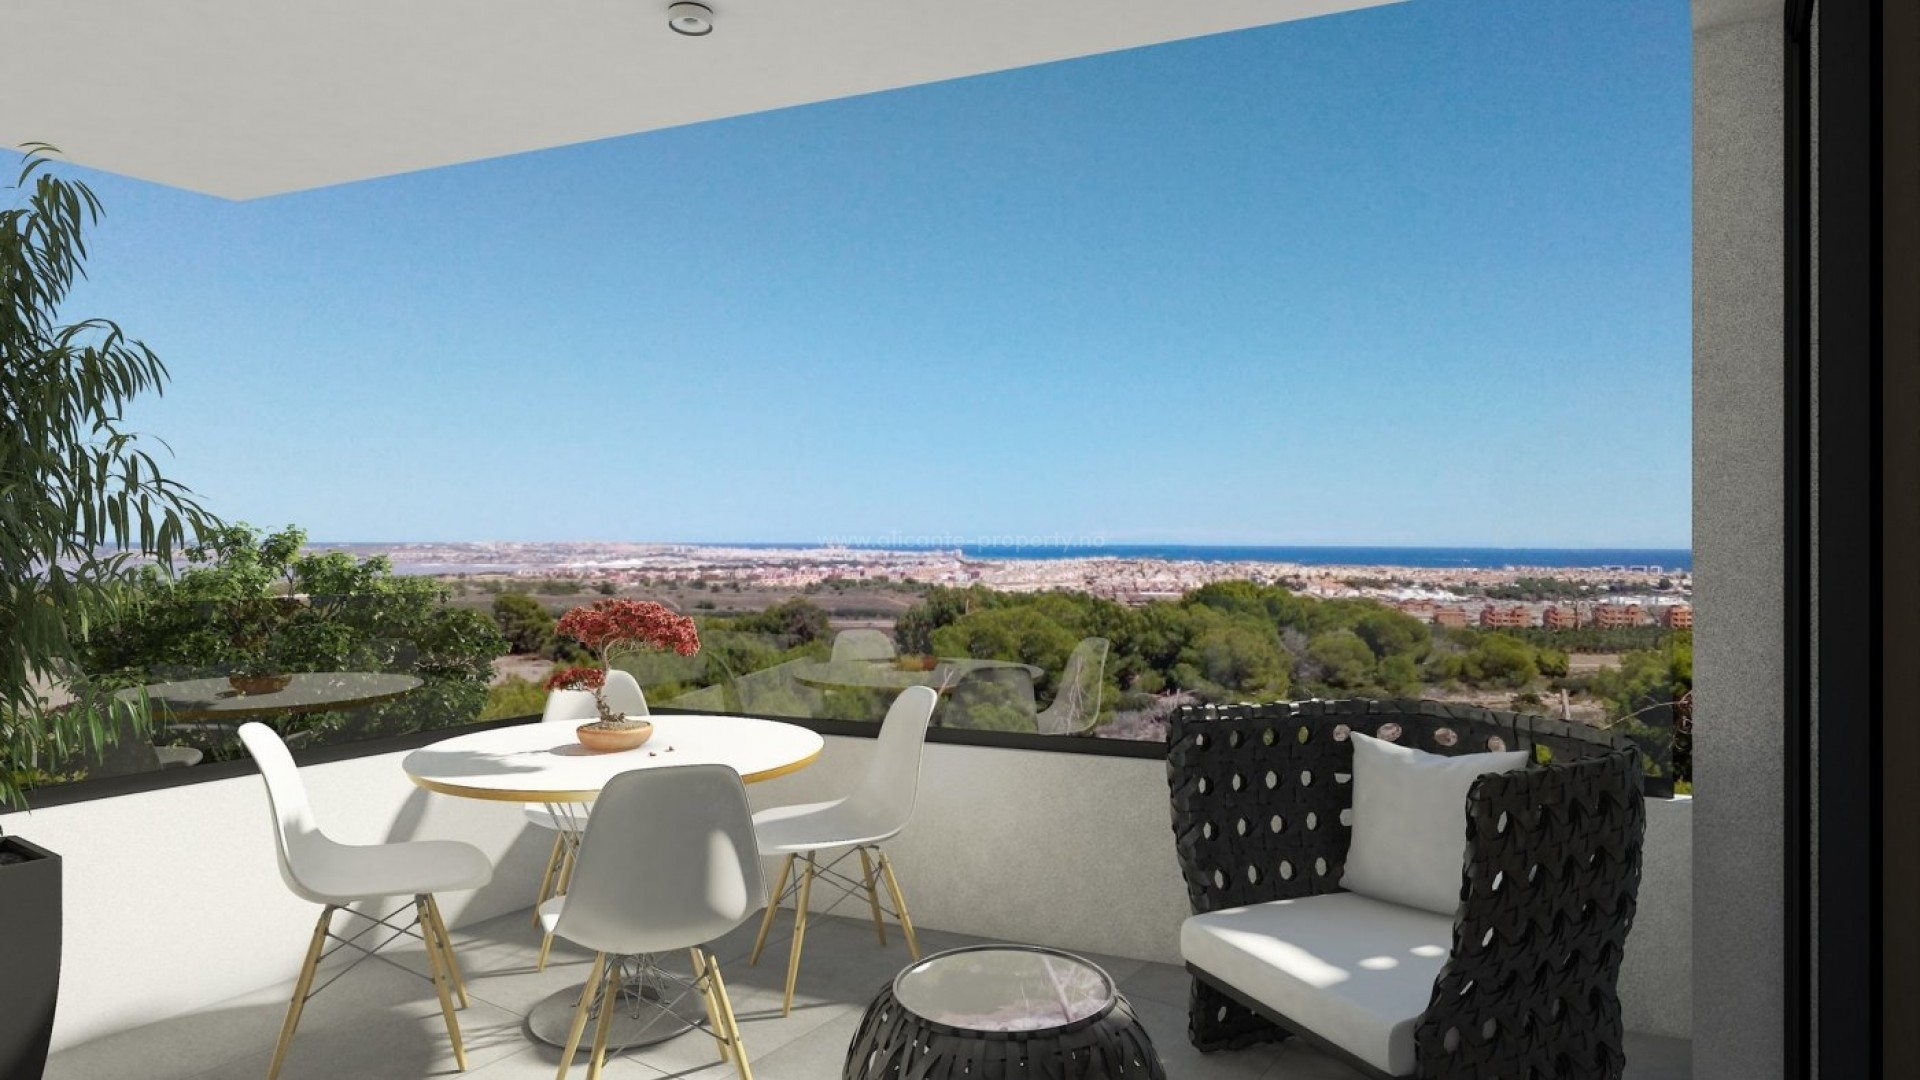 Apartment complex in Villamartin, 2 bedrooms, 2 bathrooms, garden or terrace or exclusive top floor with private solarium, shared pool, close to good golf courses